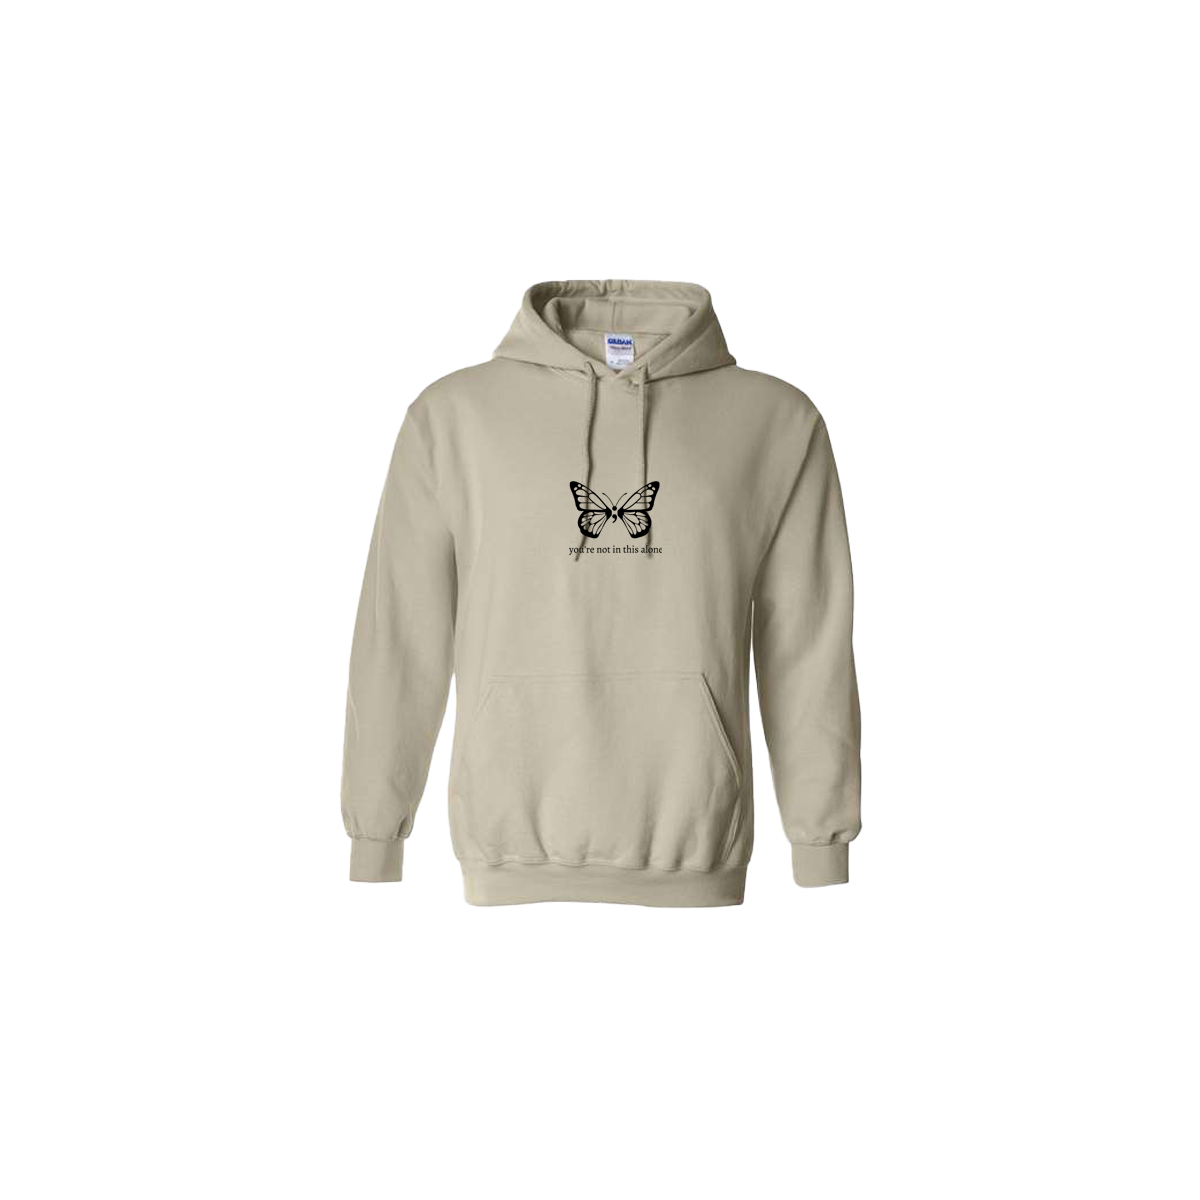 You're Not In This Alone Butterfly Embroidered Beige Hoodie - Mental Health Awareness Clothing